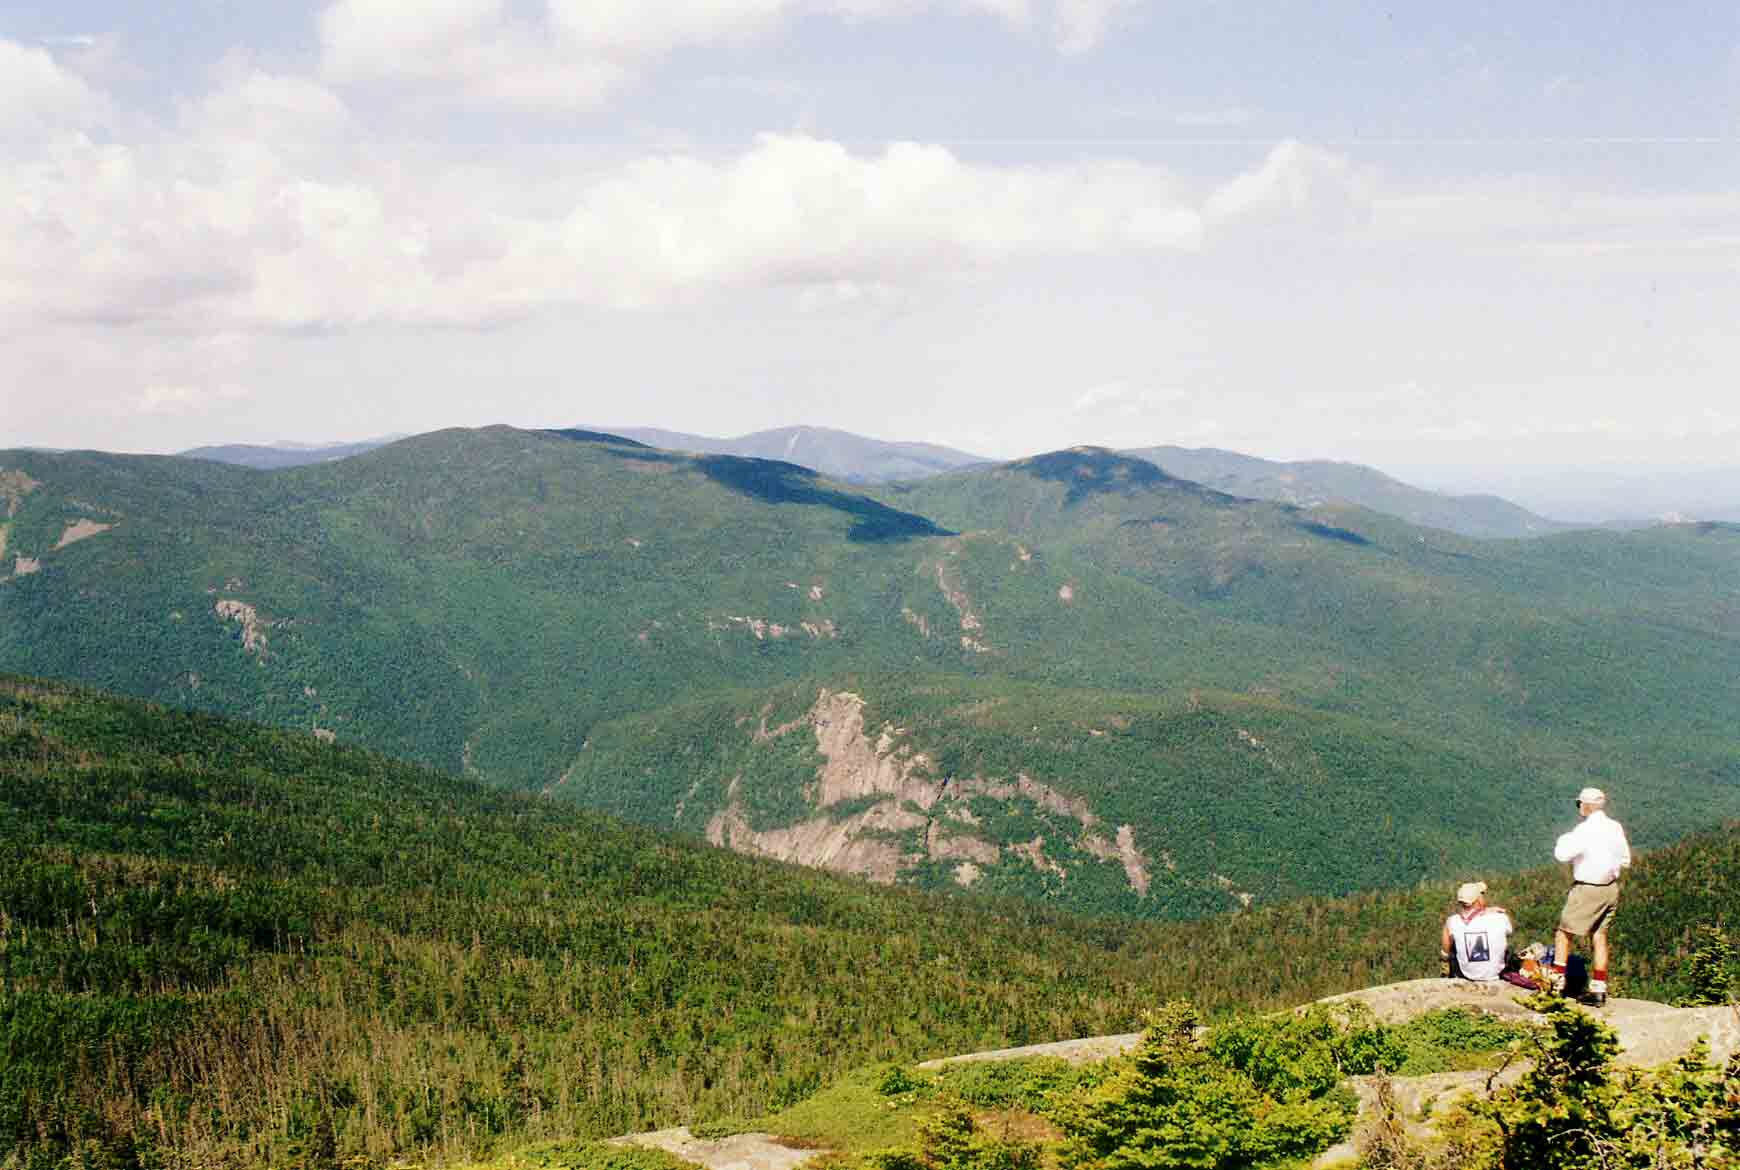 mm 21.3 - Looking west from the summit of Mt. Jackson. Courtesy dlcul@conncoll.edu